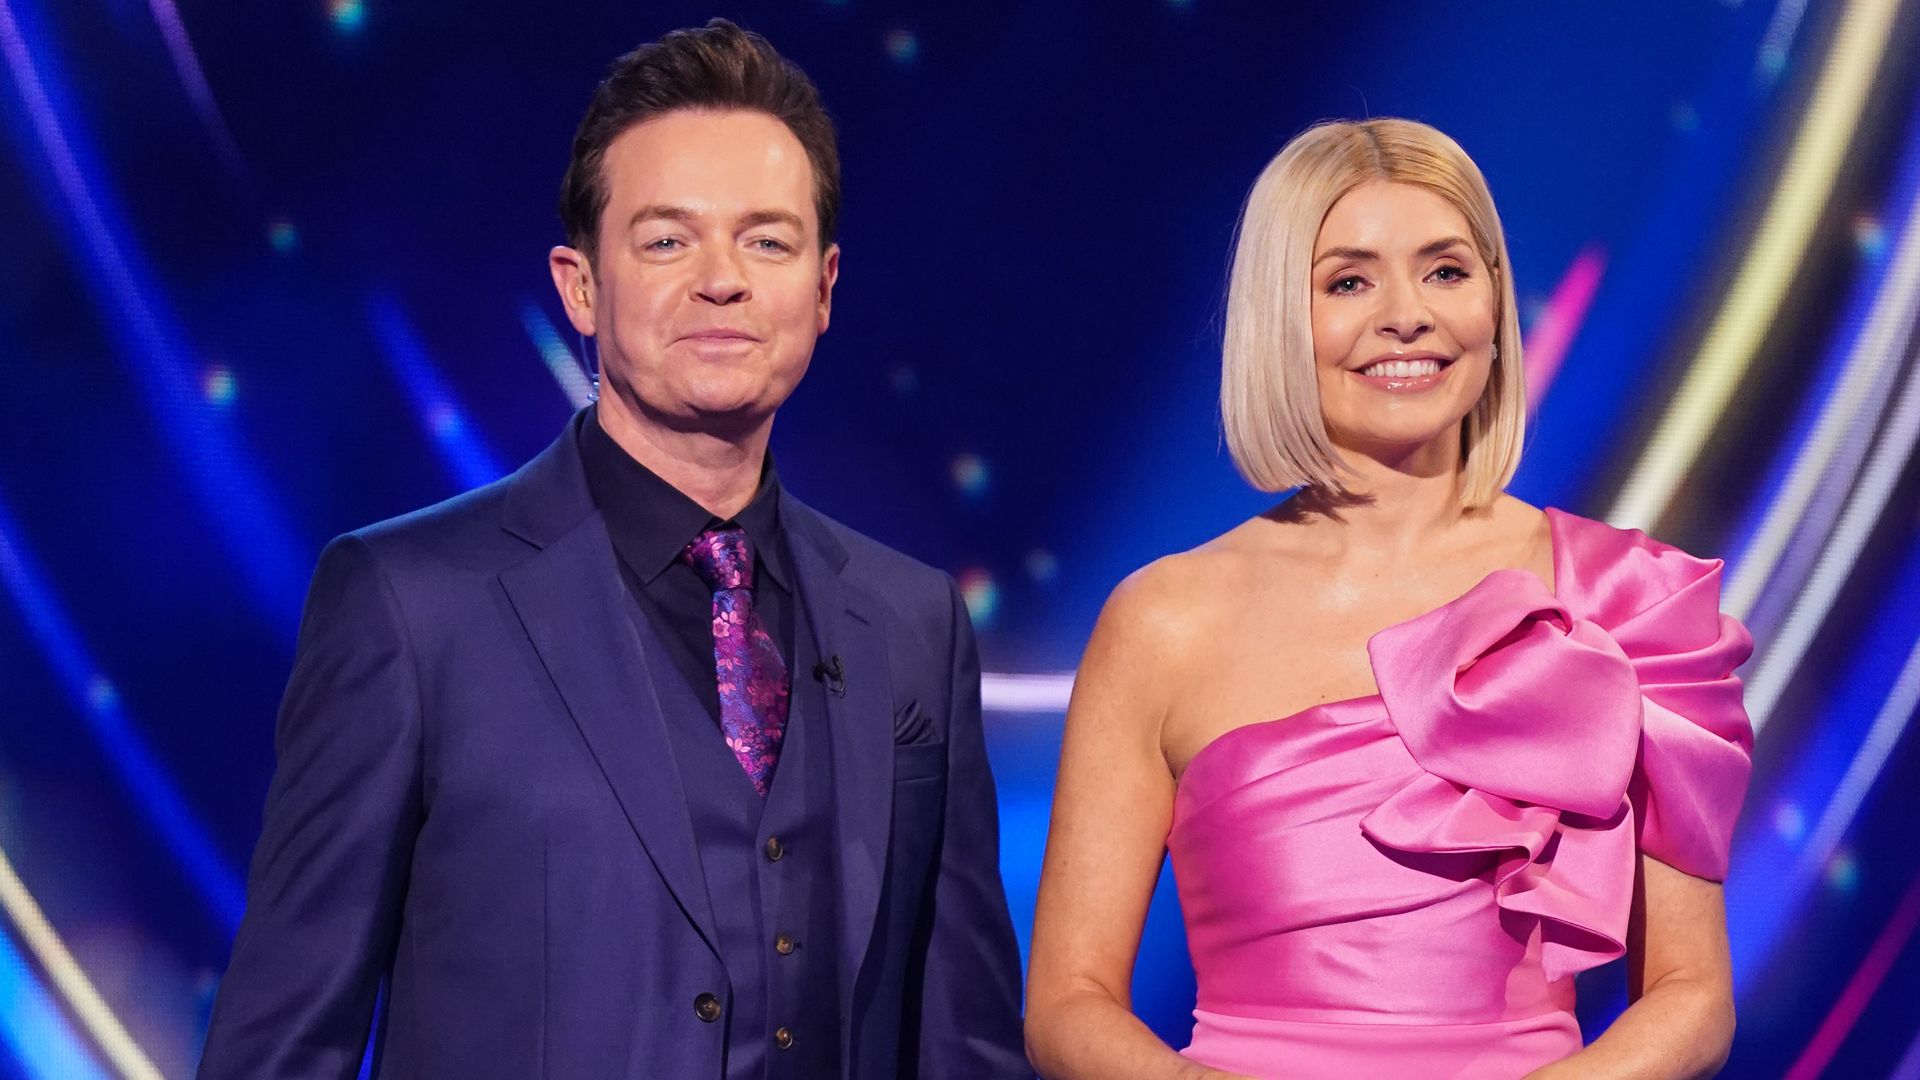 Stephen Mulhern reveals special way Holly Willoughby helps him every week ahead of Dancing on Ice